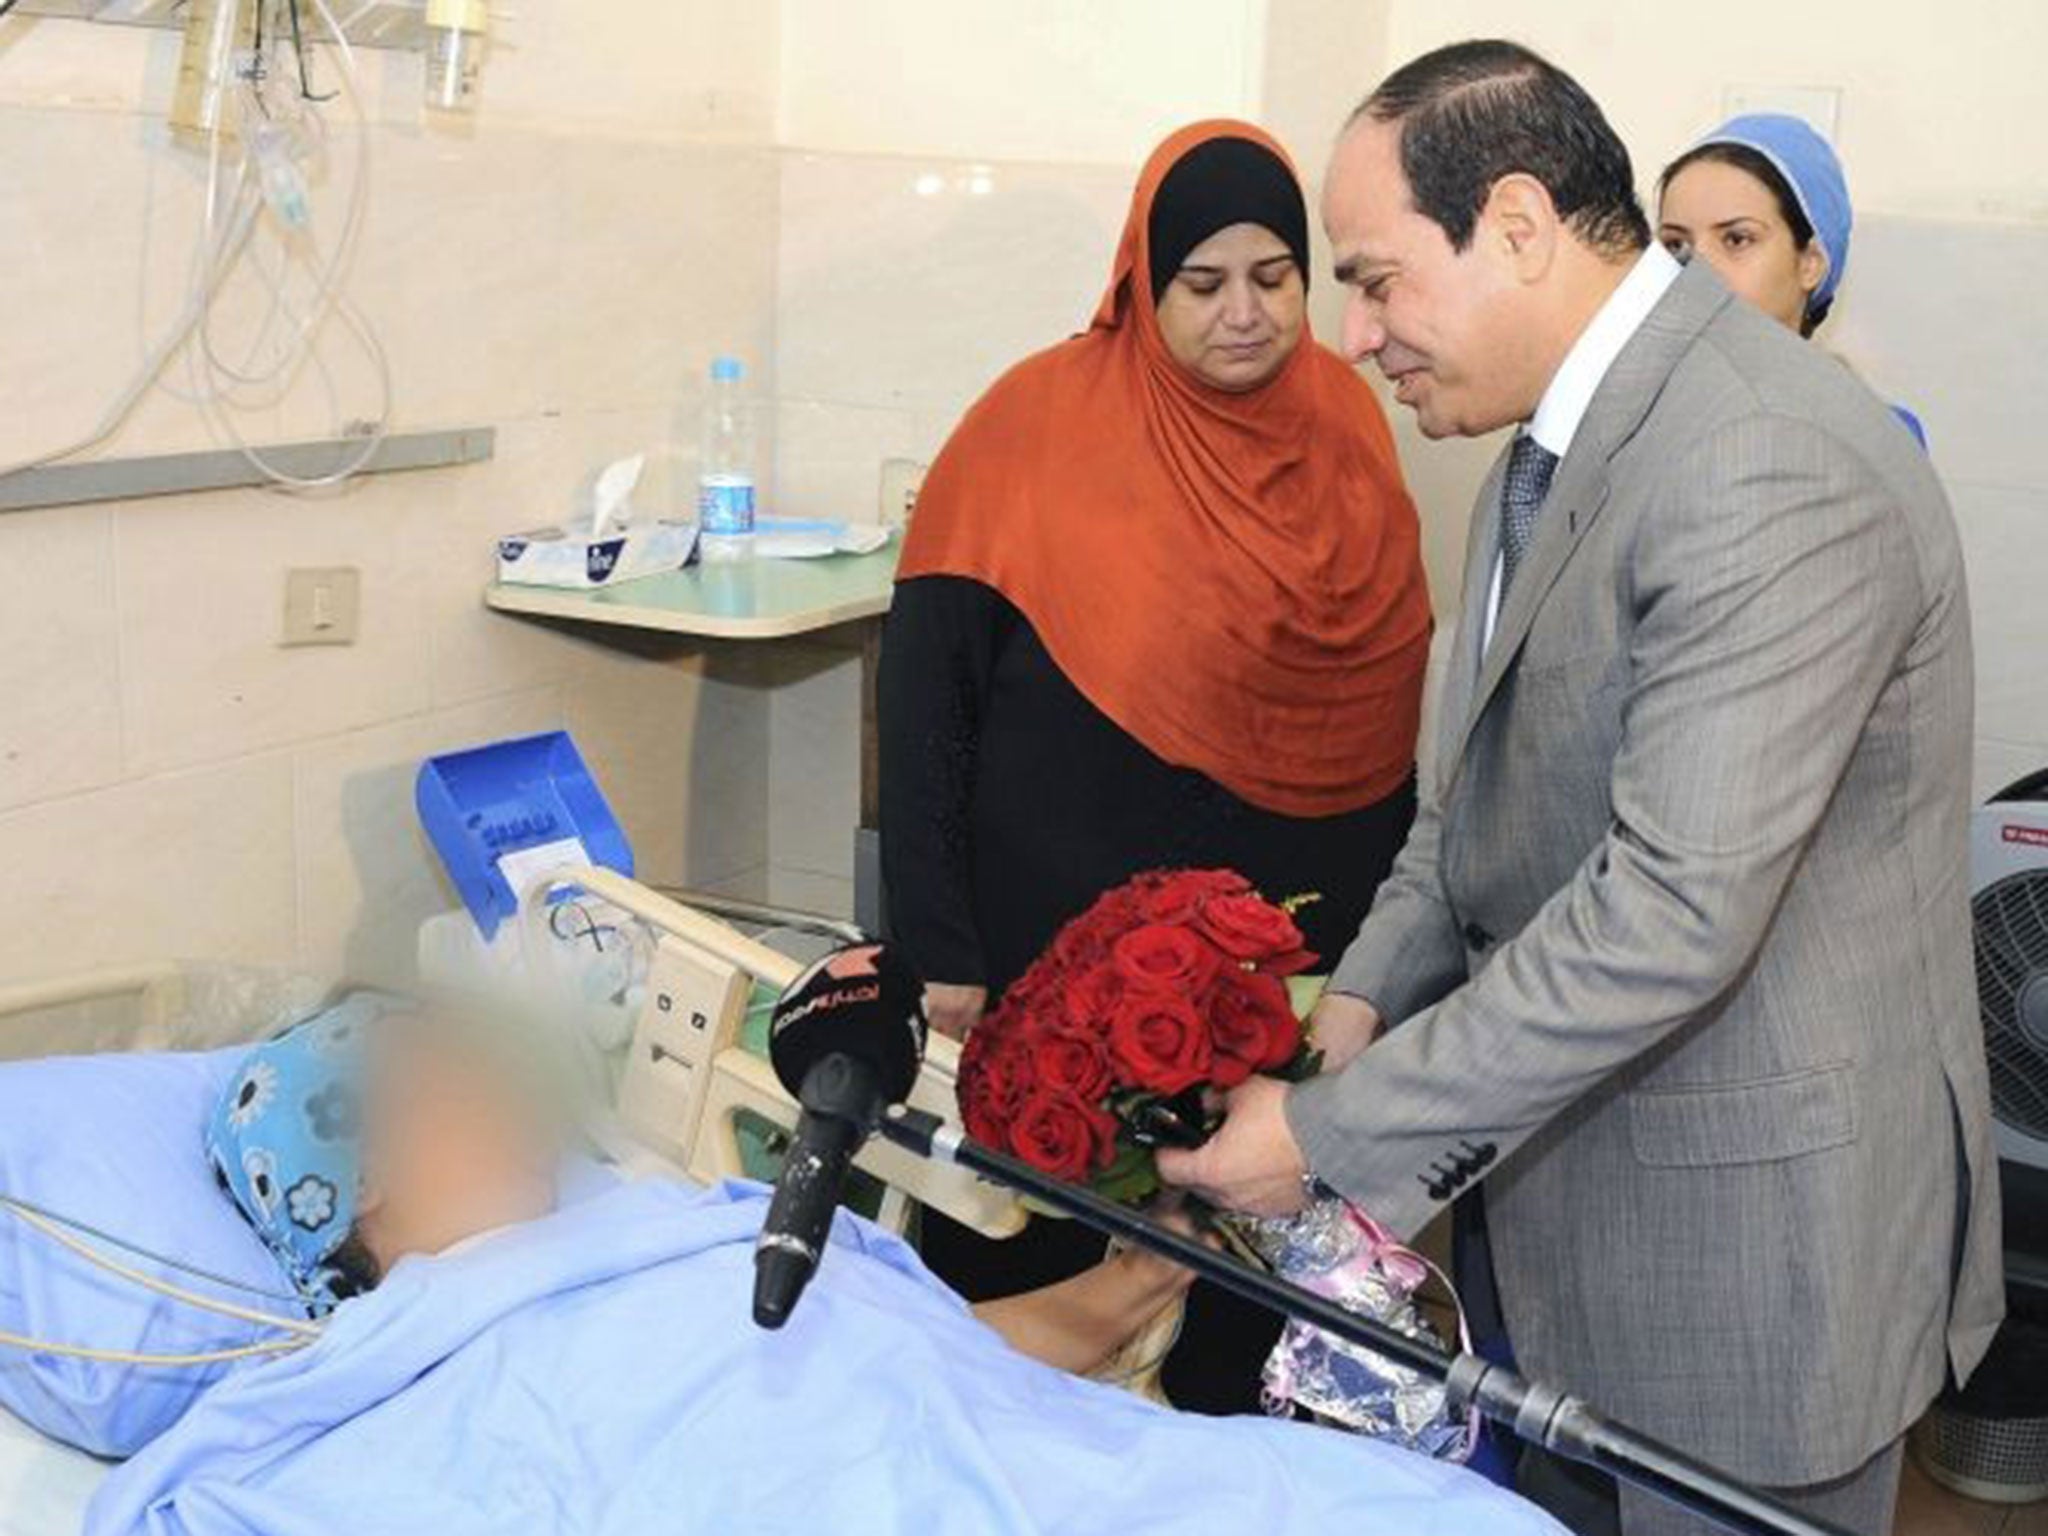 Egypt's President Abdel Fattah al-Sisi presents a bouquet of flowers to a woman who was sexually assaulted by a mob during Sunday's celebrations marking his inauguration, at a hospital in Cairo June 11, 2014